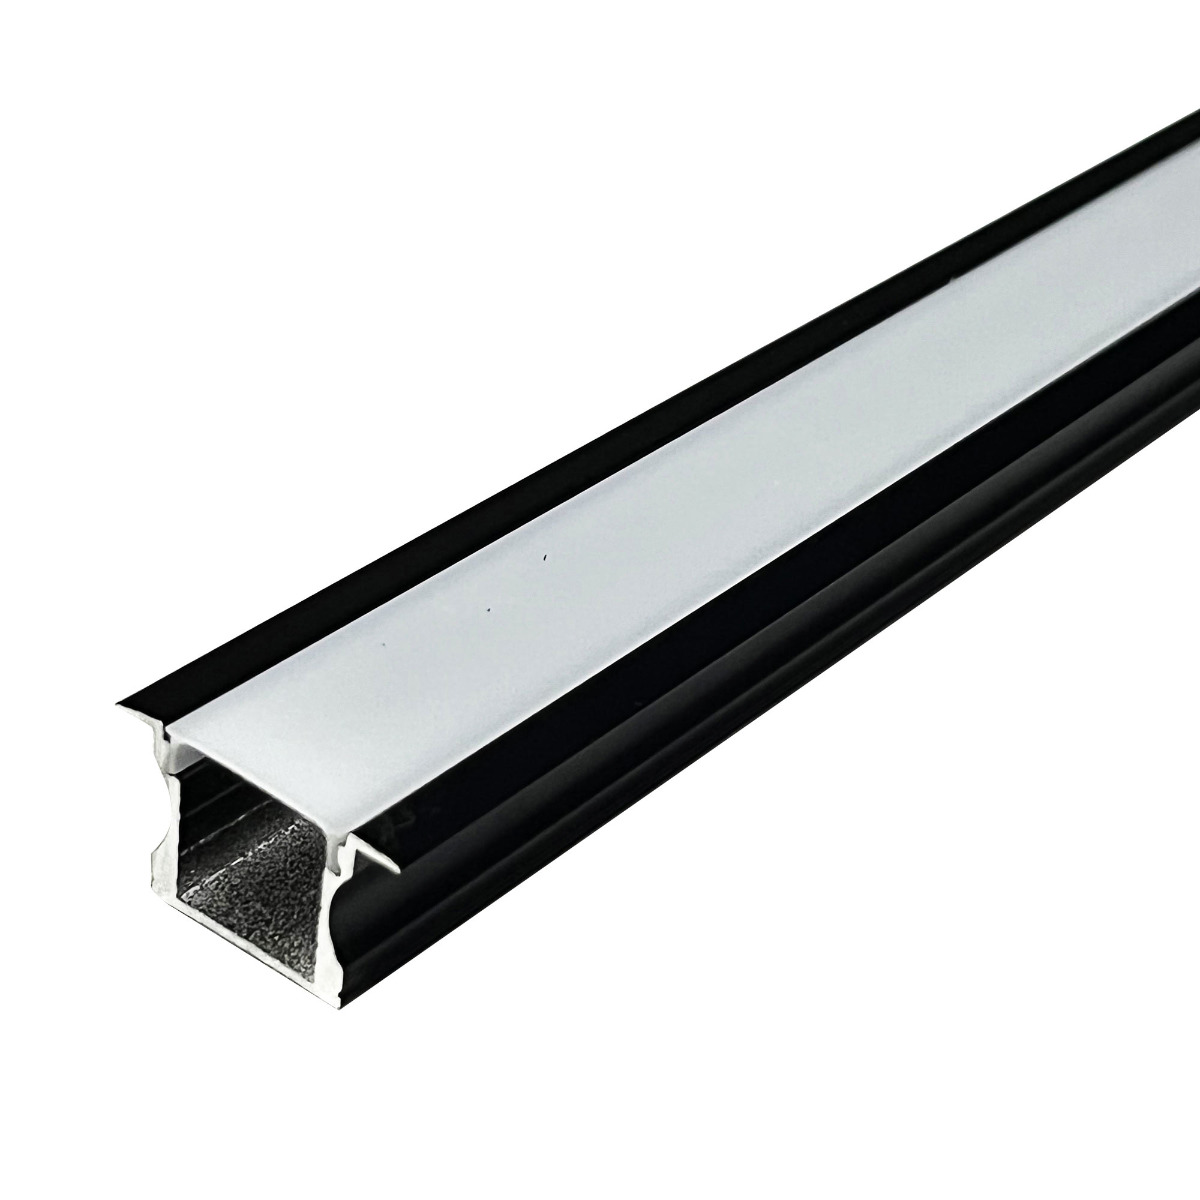 View 2m Recessed 15mm Black Aluminium Profile With Frosted Cover information